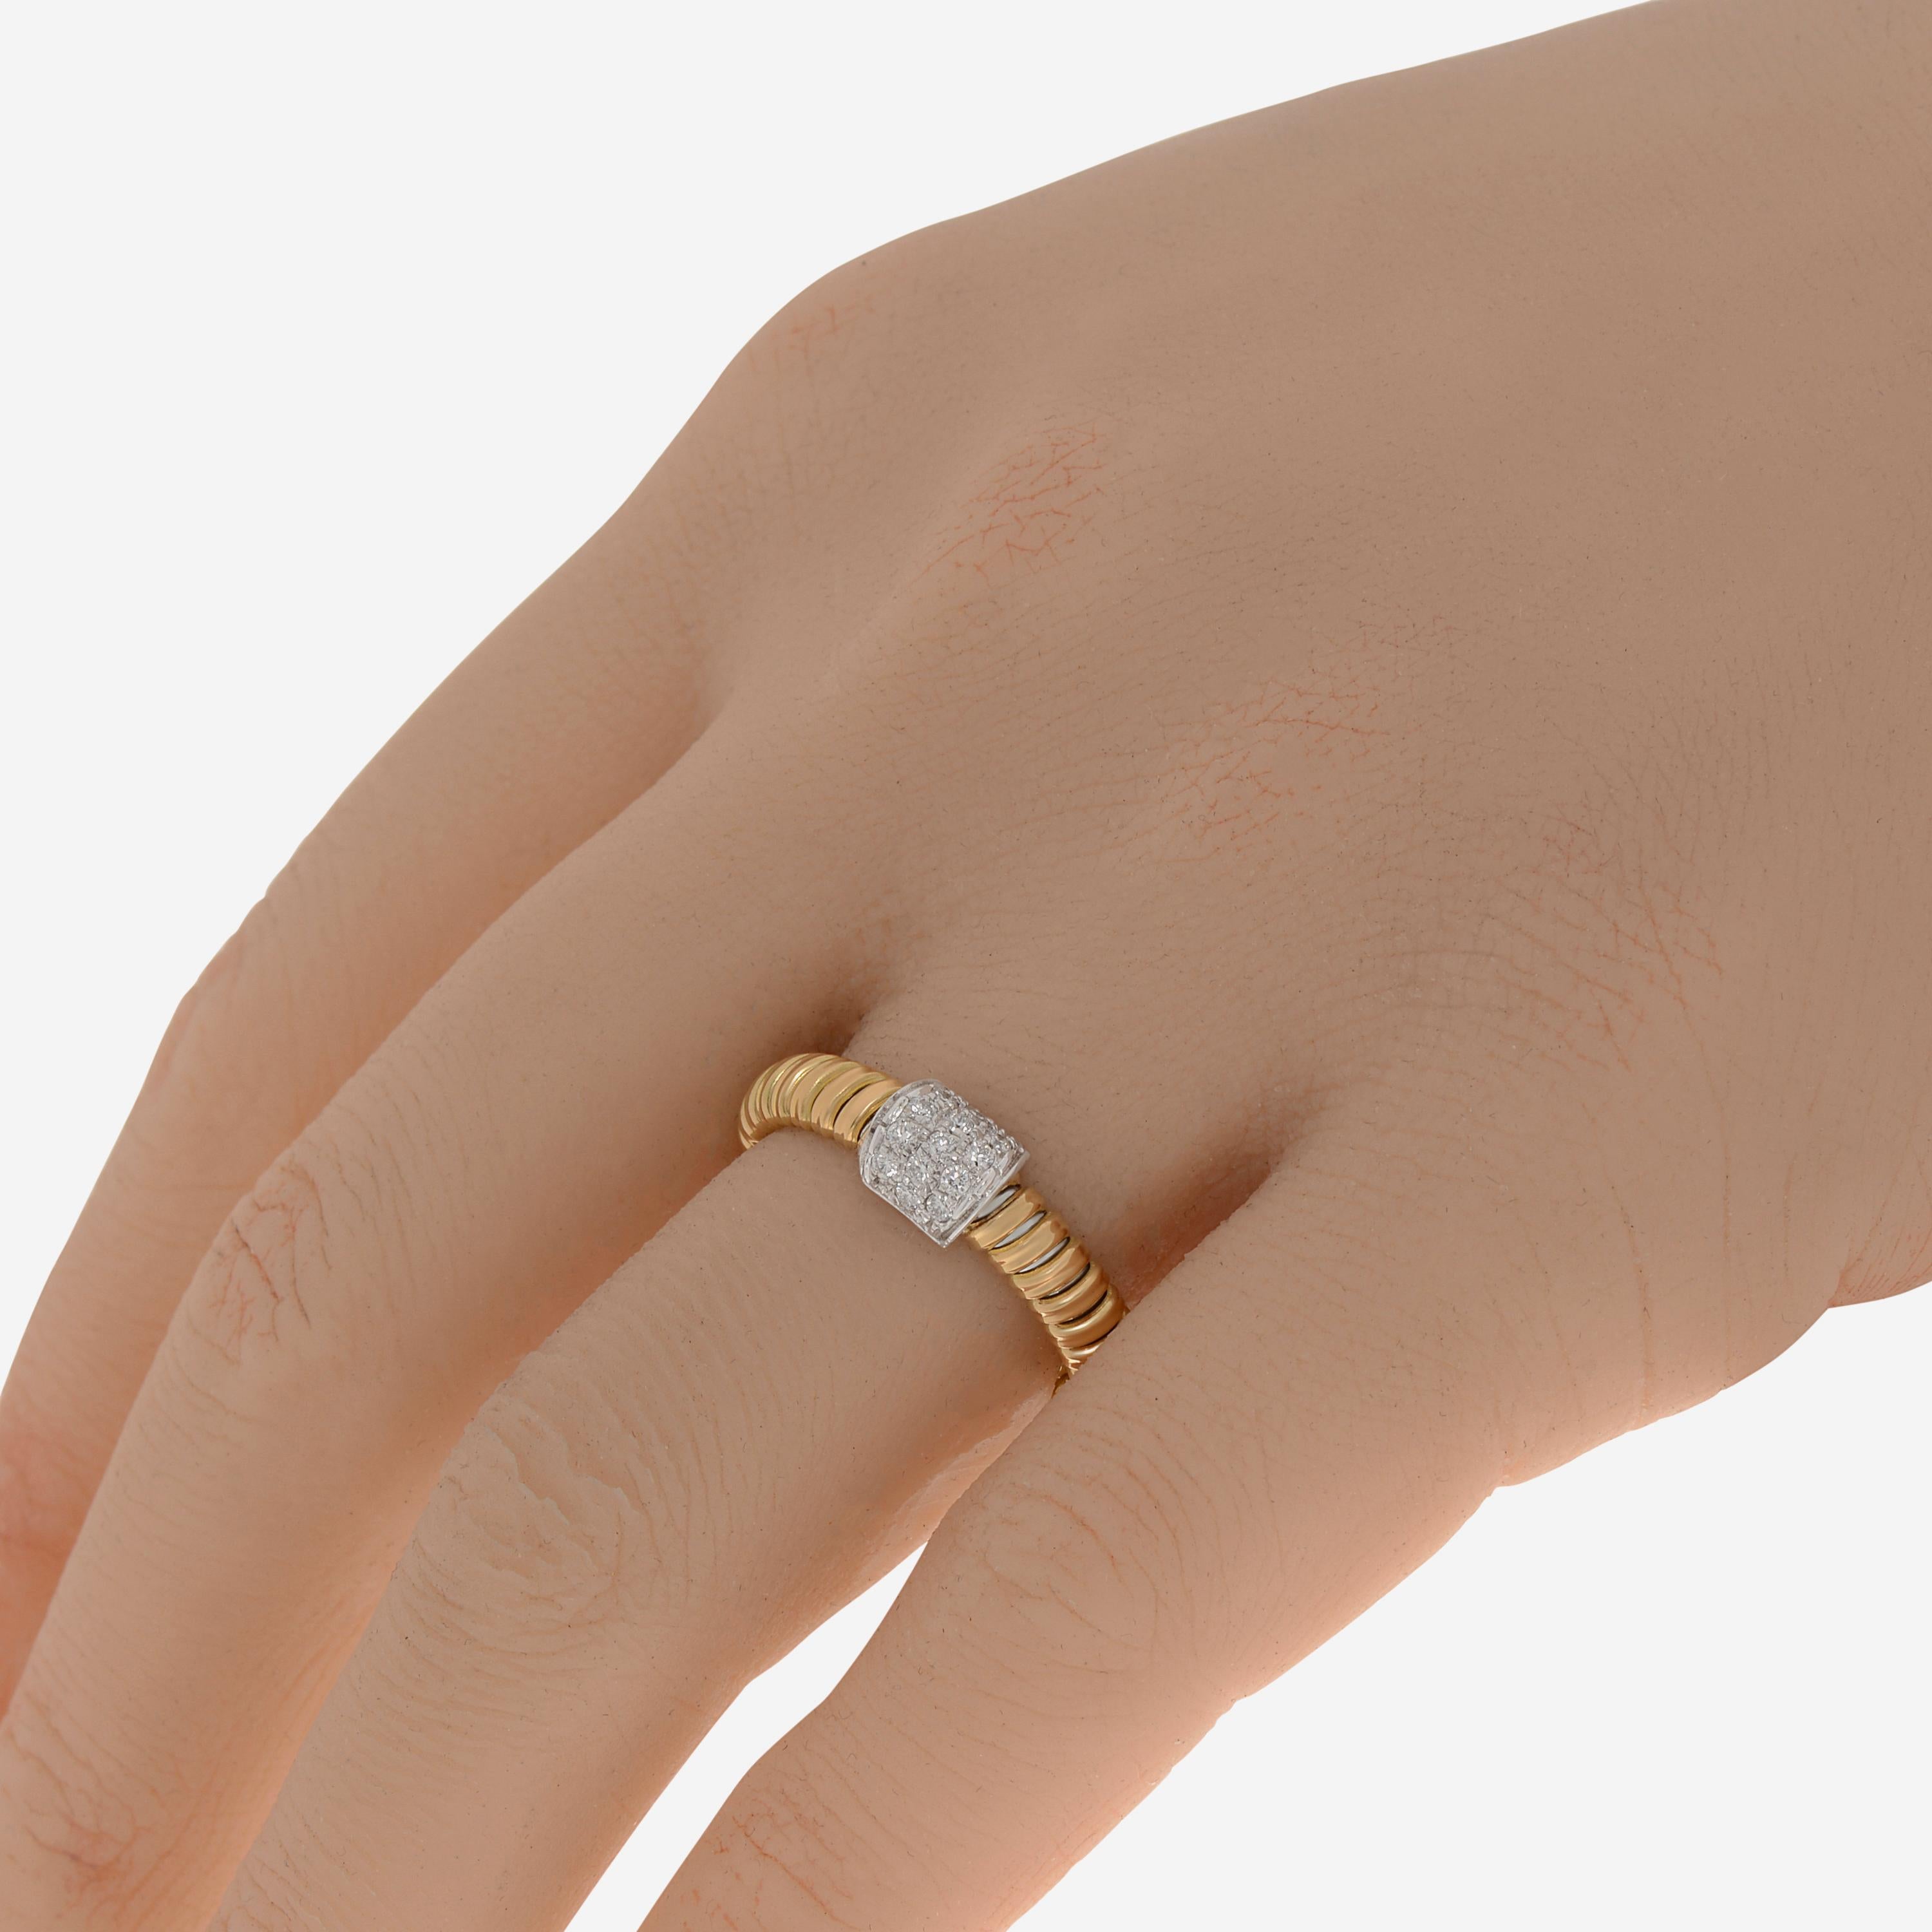 Tessitore Tubogas 18K yellow gold band ring features traditional tubogas details set with 0.15ct. tw. diamonds in stainless steel. The ring size is 5 (49.3). The band width is 1/8